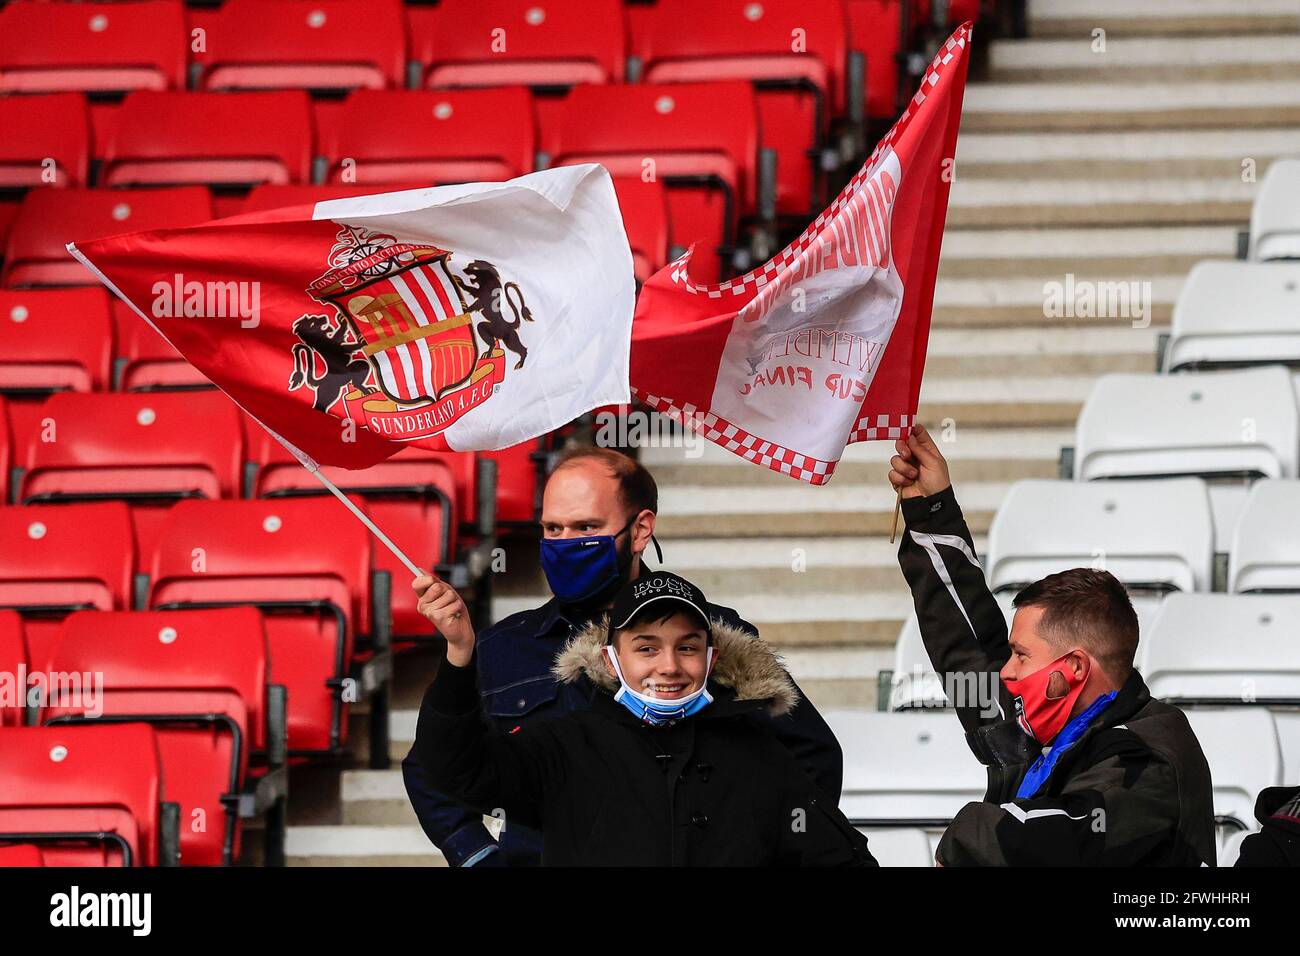 Two Sunderland fans wave their flags as they enjoy returning to the Stadium of Light after 14 months away due to Covid-19 restrictions Stock Photo